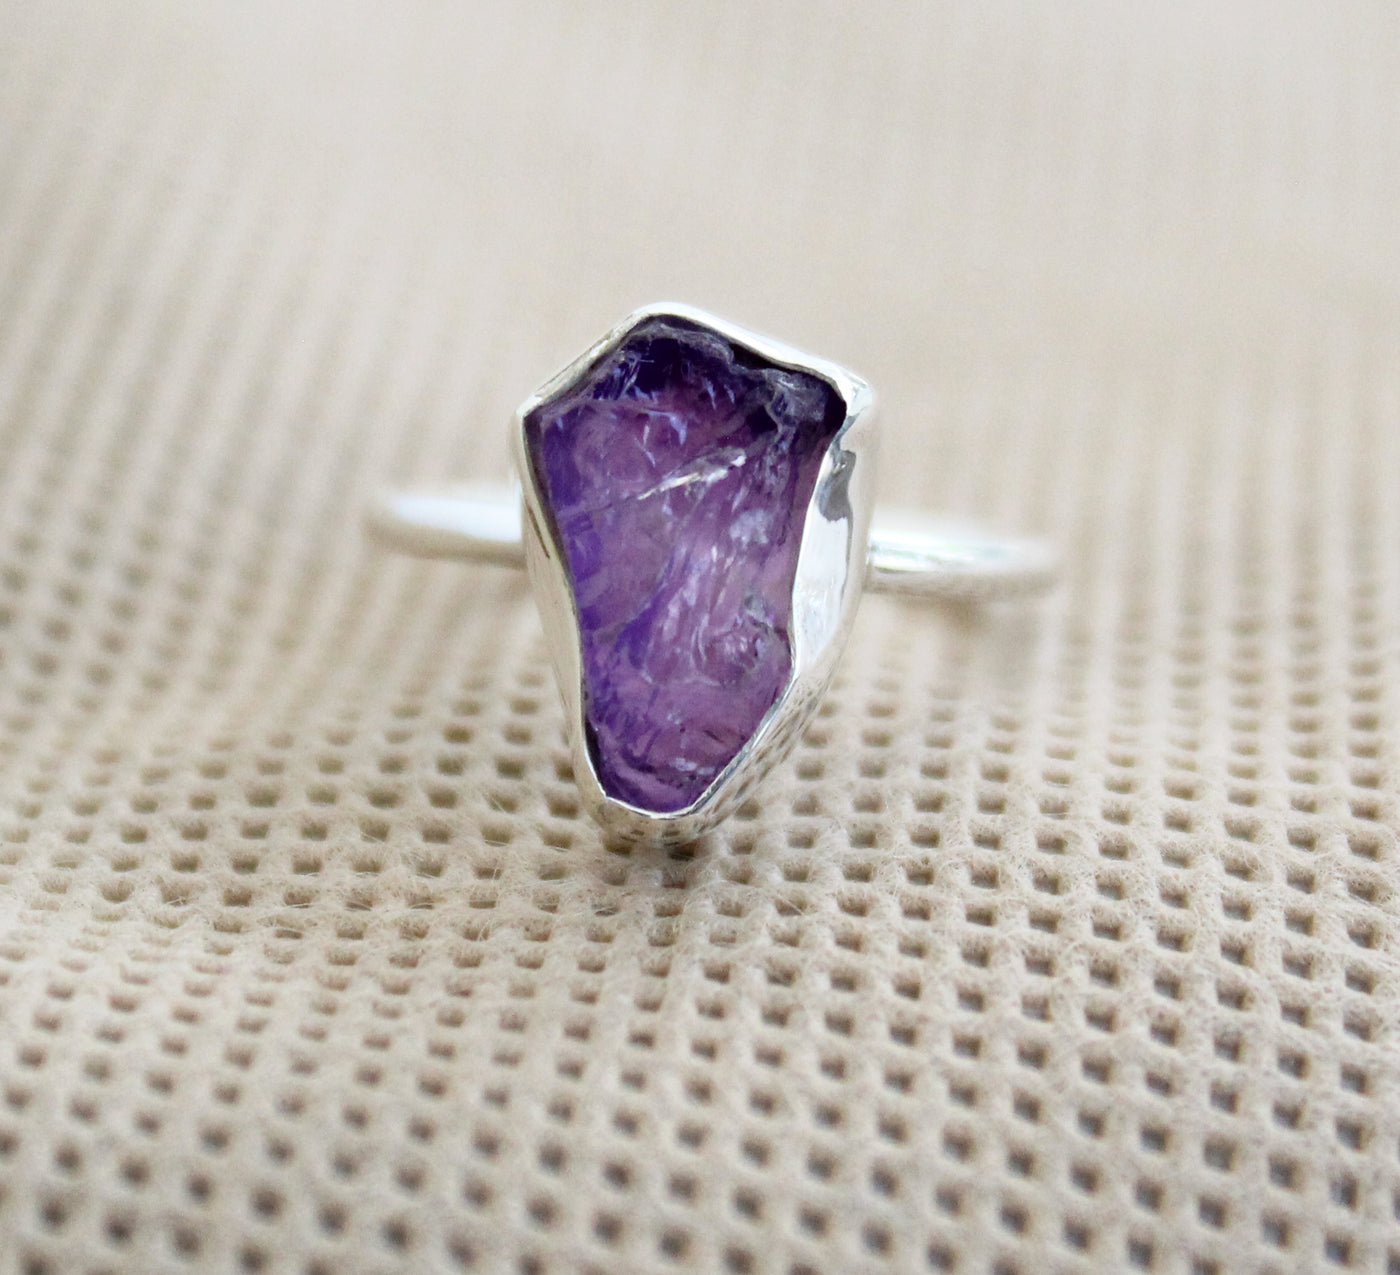 Raw Amethyst Ring, Raw Crystal Ring, Sterling Silver Ring, Delicate Ring, Purple Amethyst Ring, Minimalist Ring, Stack Ring, Delicate Ring